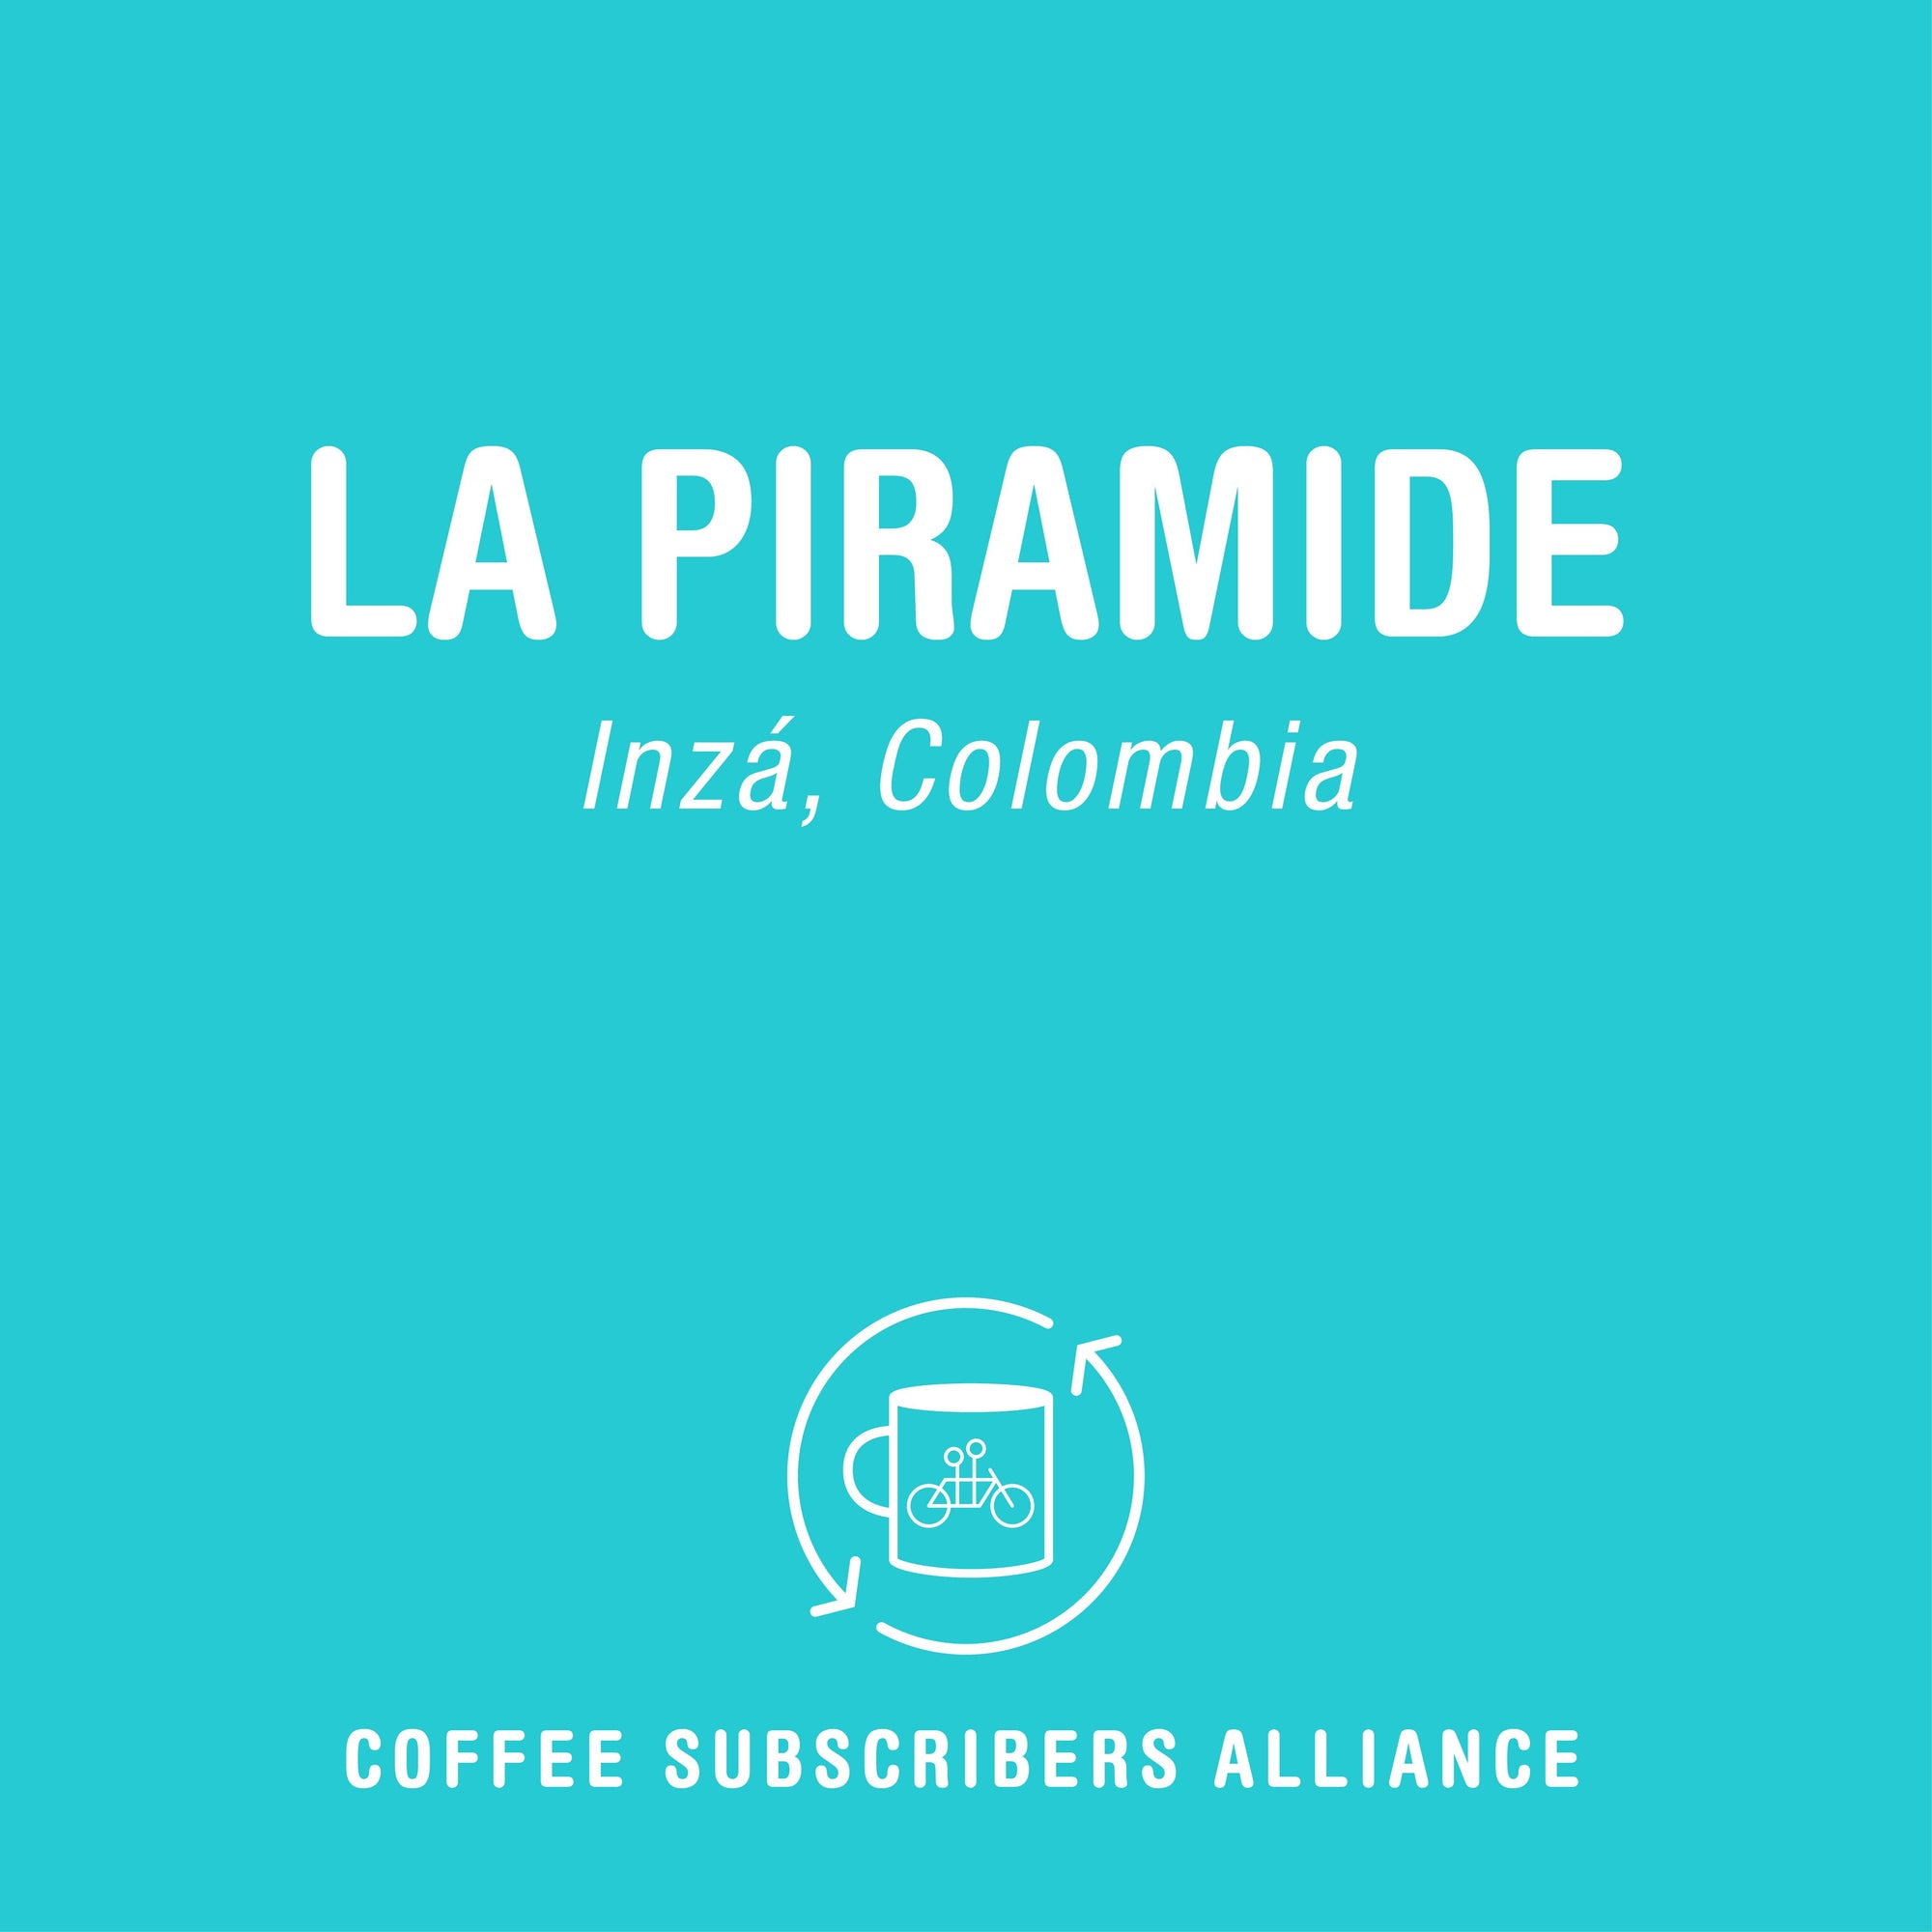 Text on a teal background reading "La Piramide Subscription from Tandem Coffee Roasters, Inzá" with a logo for Coffee Subscribers Alliance featuring a coffee cup and bicycle.